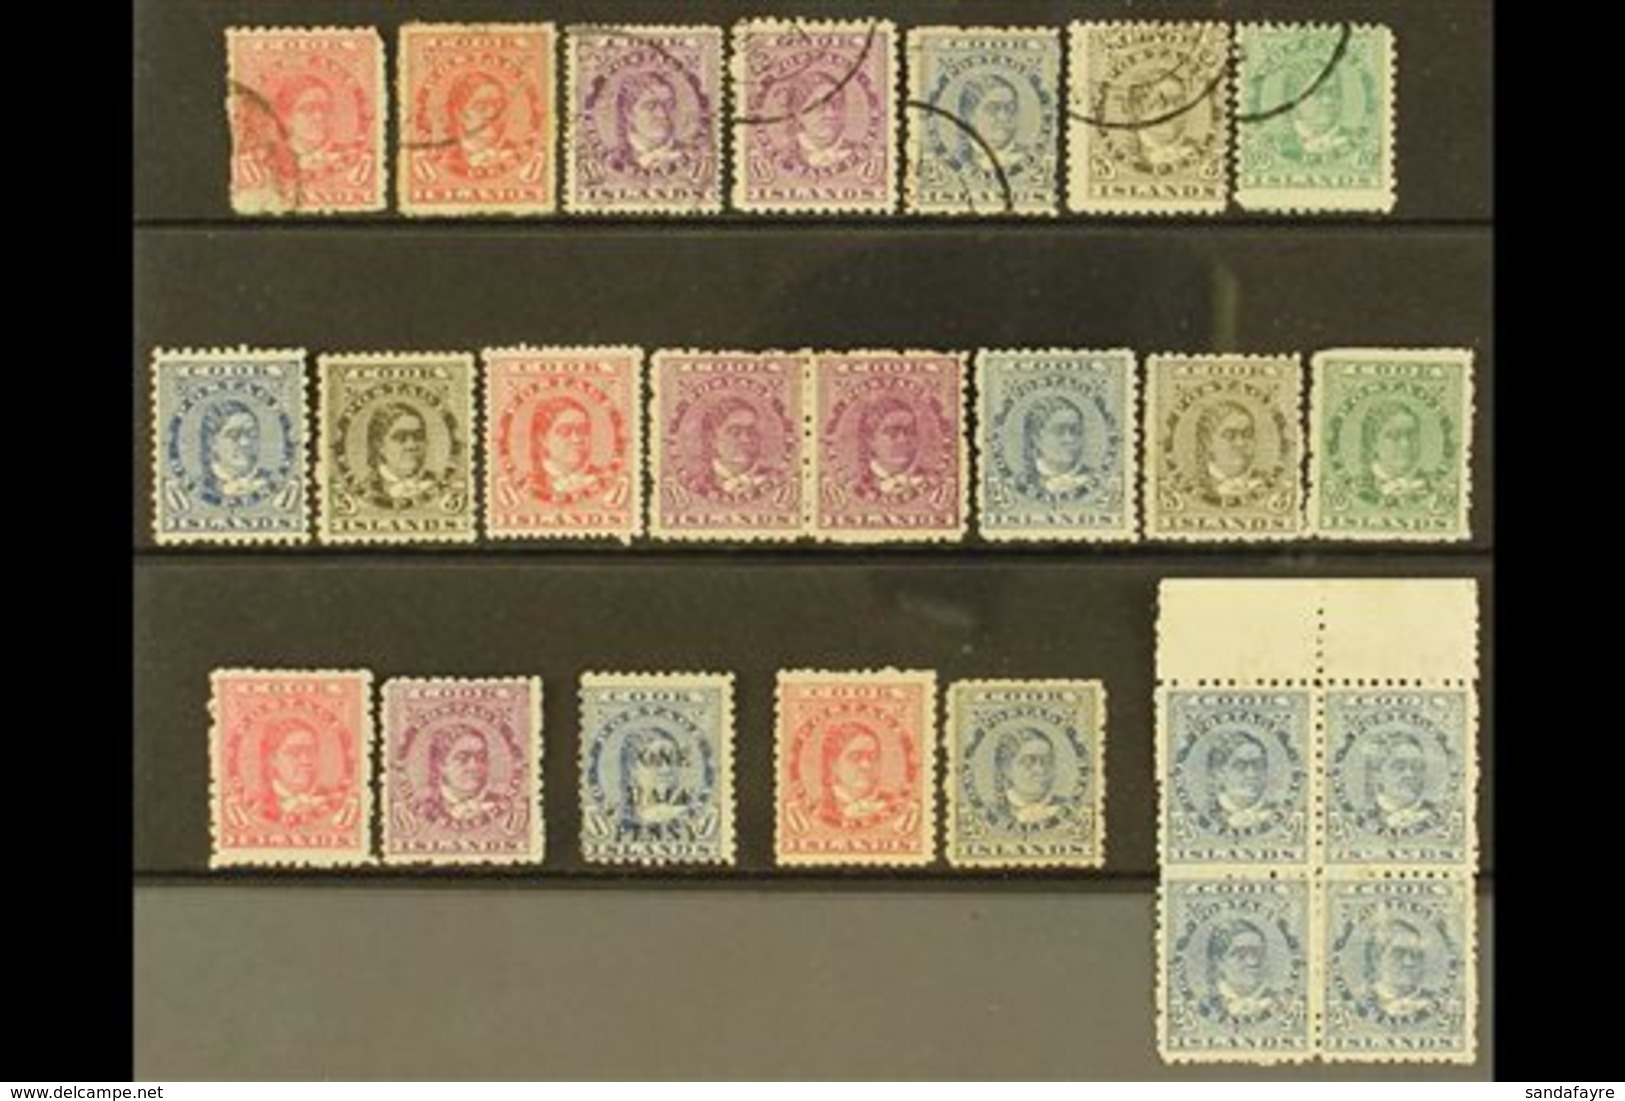 \Y 1893 - 1913 QUEEN MAKEA TAKAU ISSUES\Y 1893 Vals To 5d Olive, Perf 11 Vals To 10d Used, 1899 ½d On 1d Blue, 1902 No W - Cook